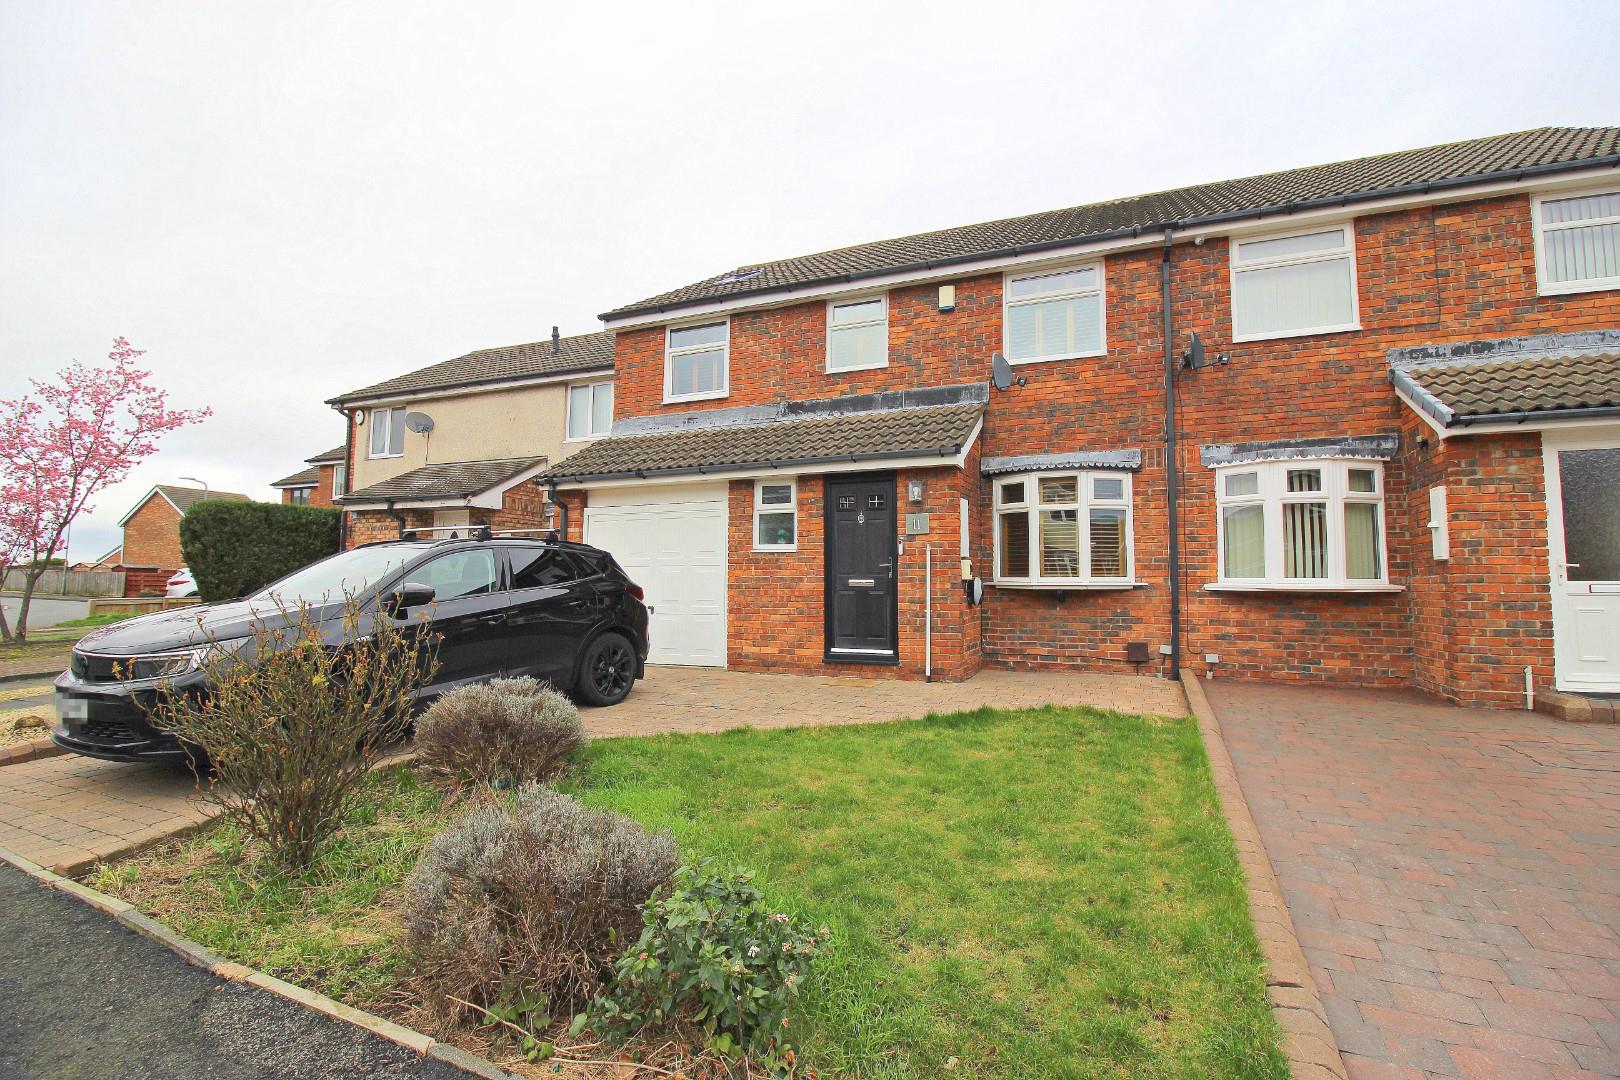 Melbeck Drive, Ouston, Chester Le Street